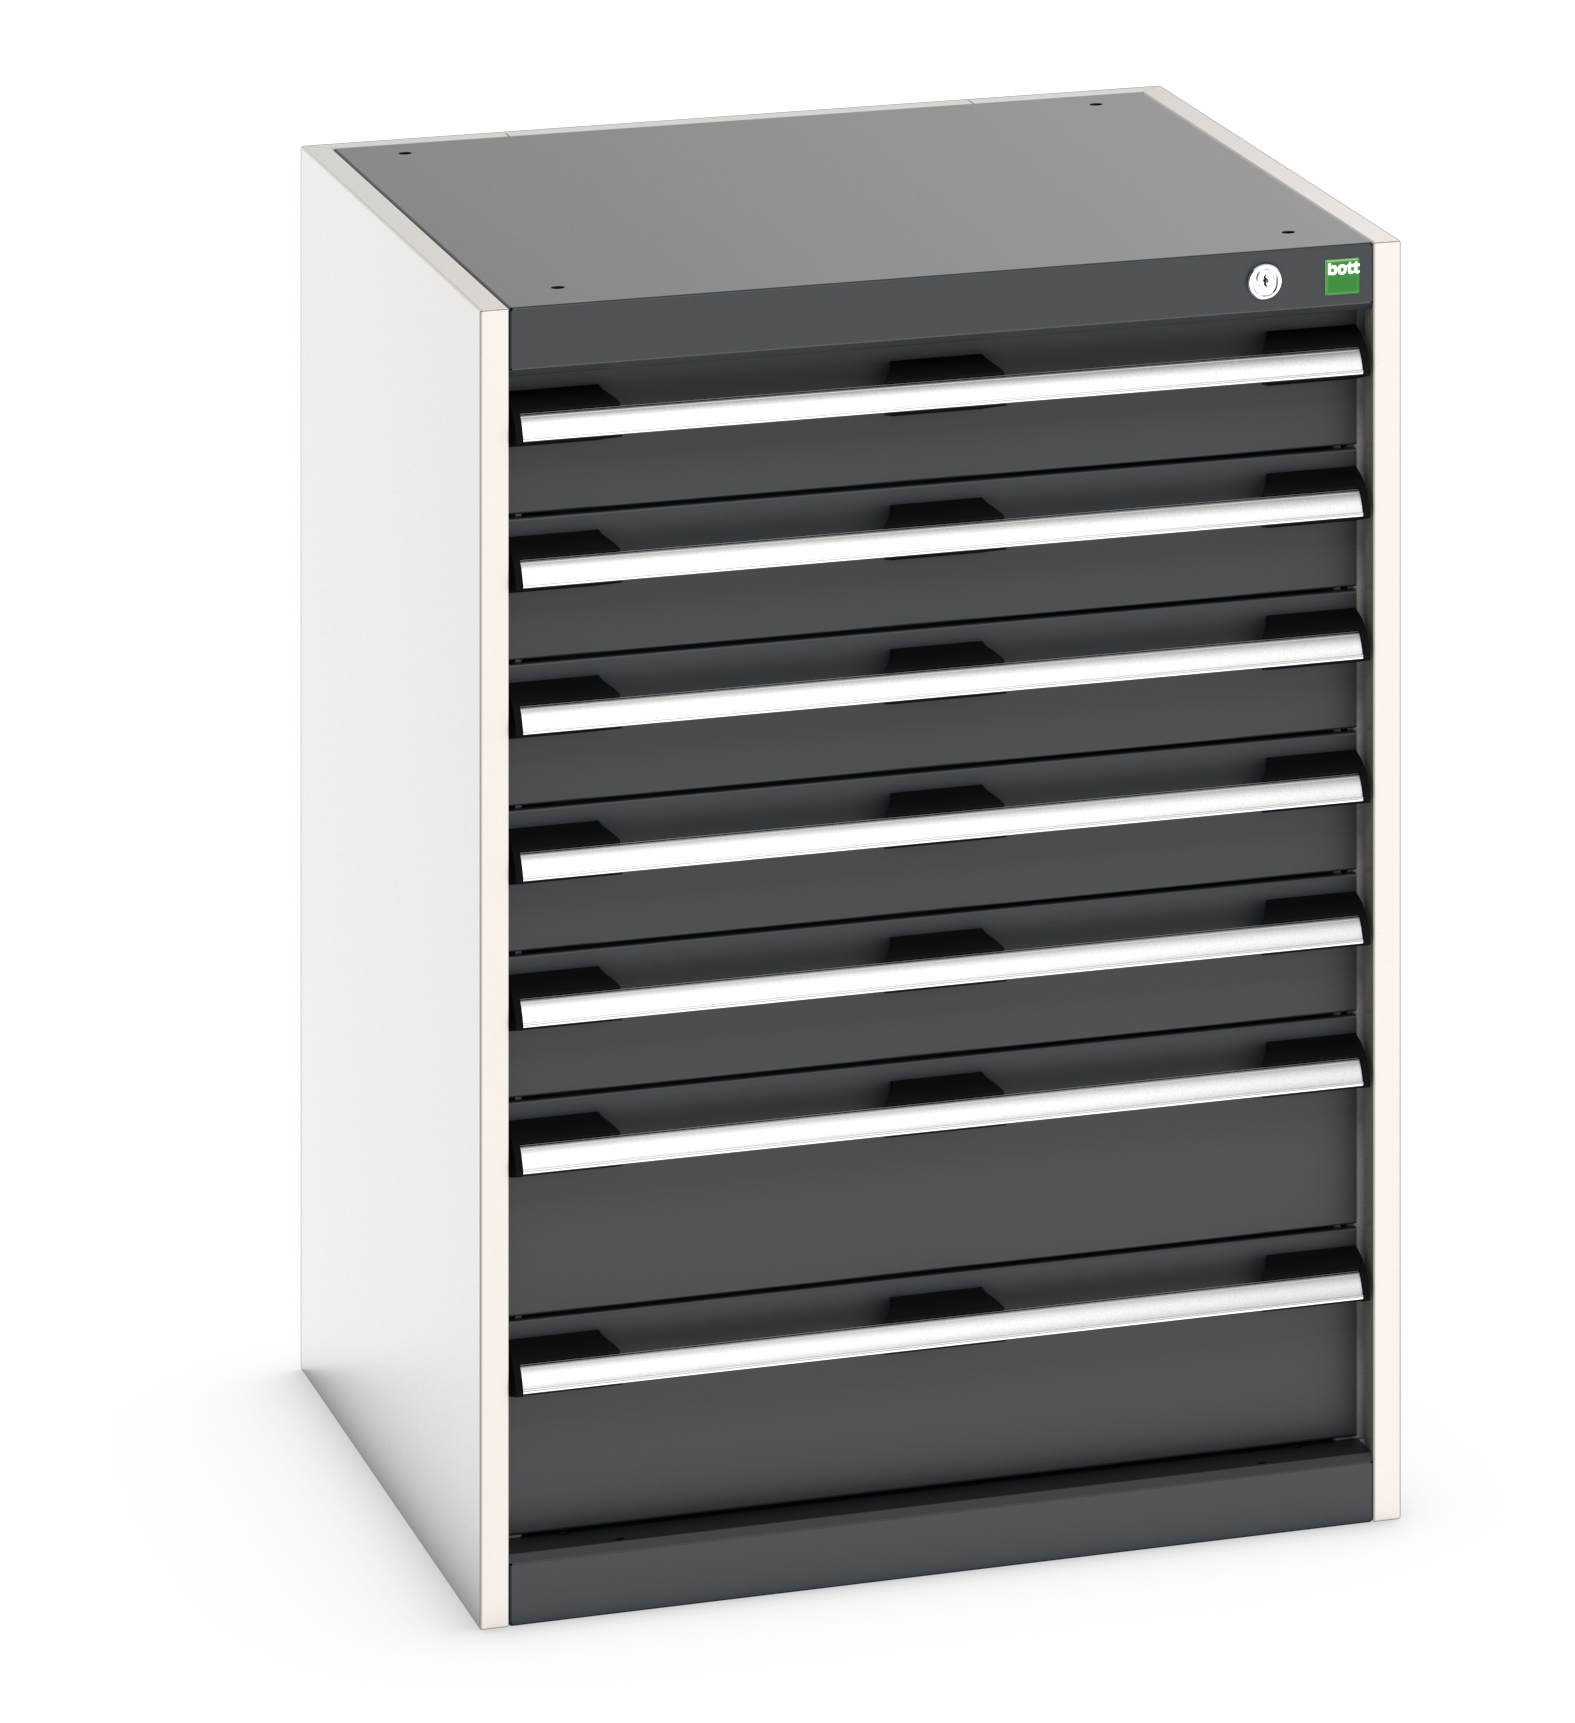 Bott Cubio Drawer Cabinet With 7 Drawers - 40019051.19V